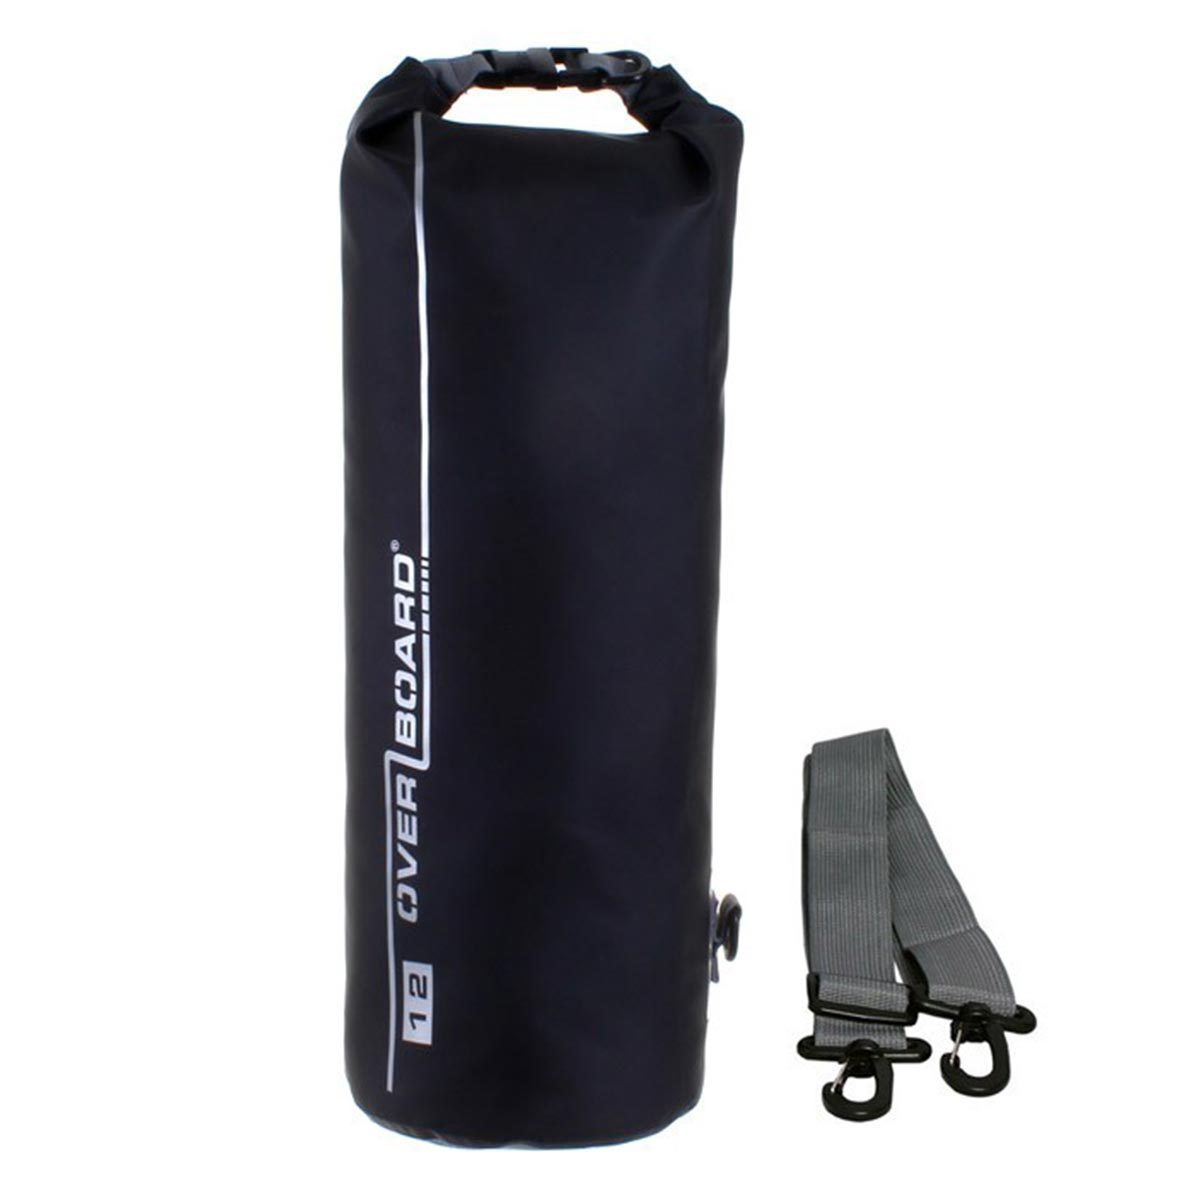 Overboard 12 Litre Dry Tube Bag Bags, Packs and Cases Overboard Black Tactical Gear Supplier Tactical Distributors Australia